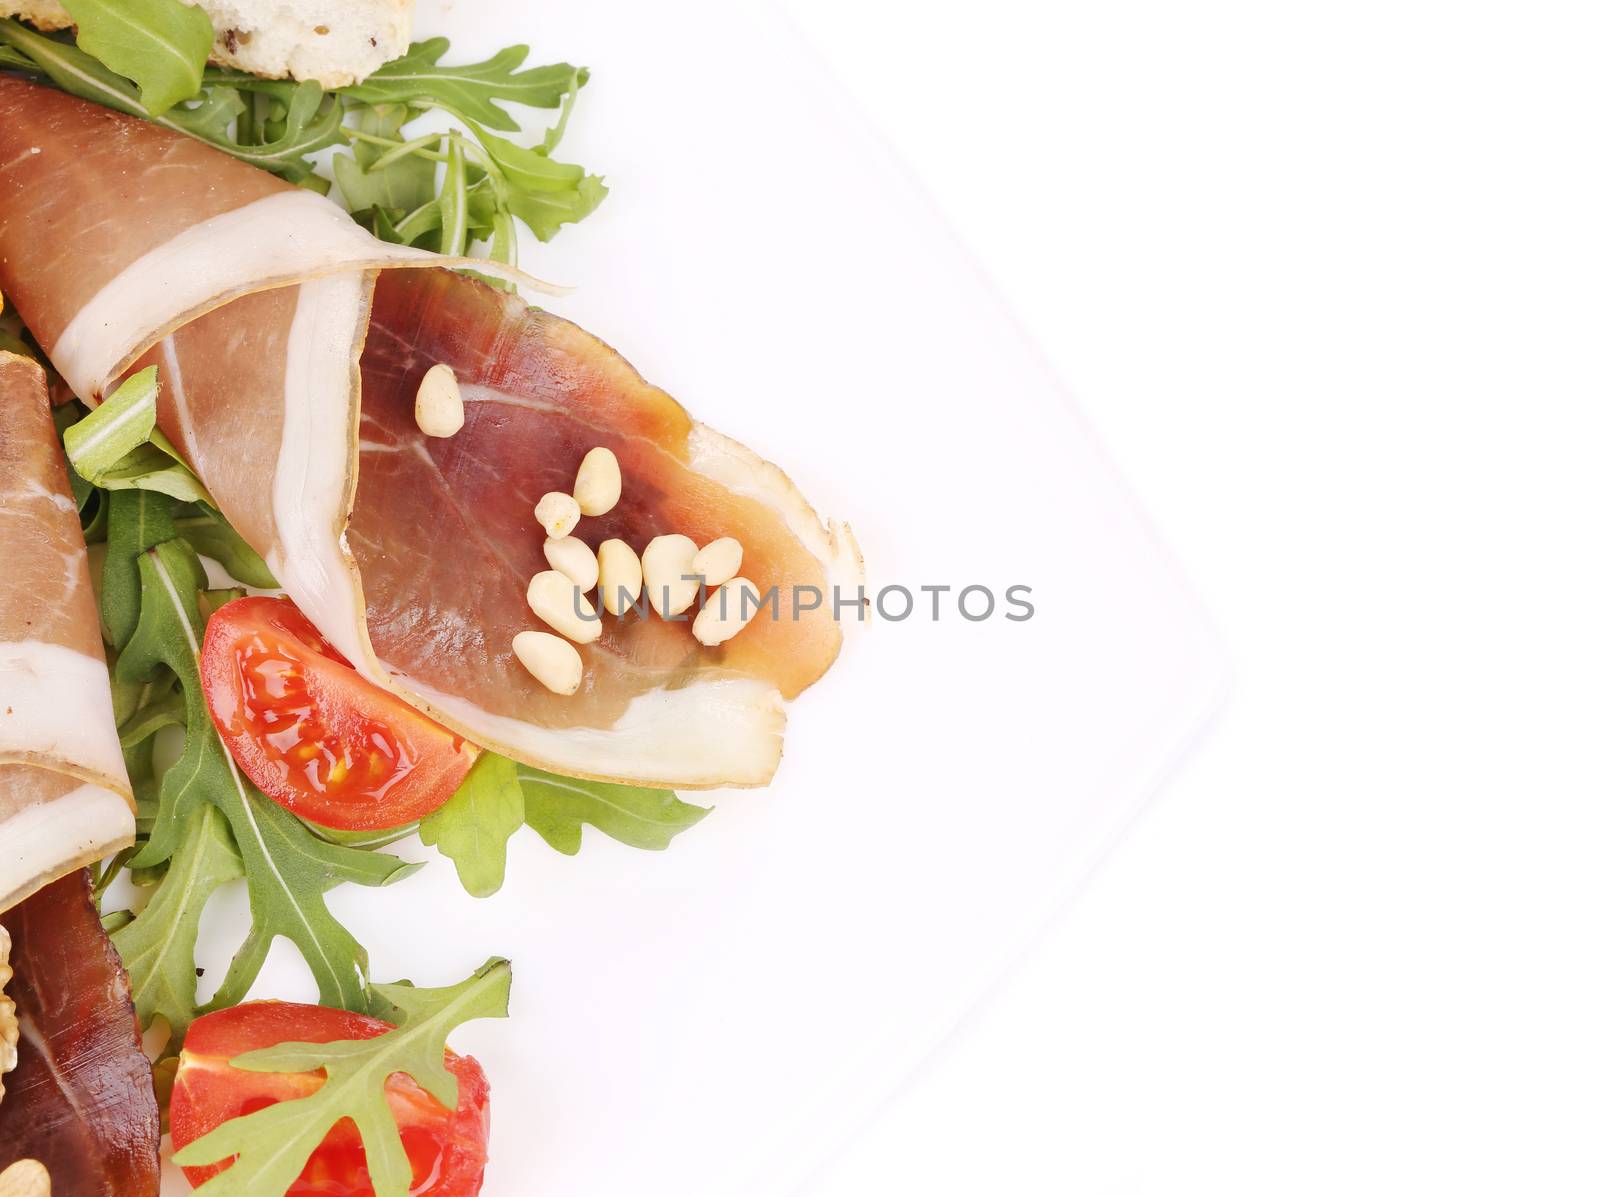 Salad with arugula and prosciutto. Whole background.